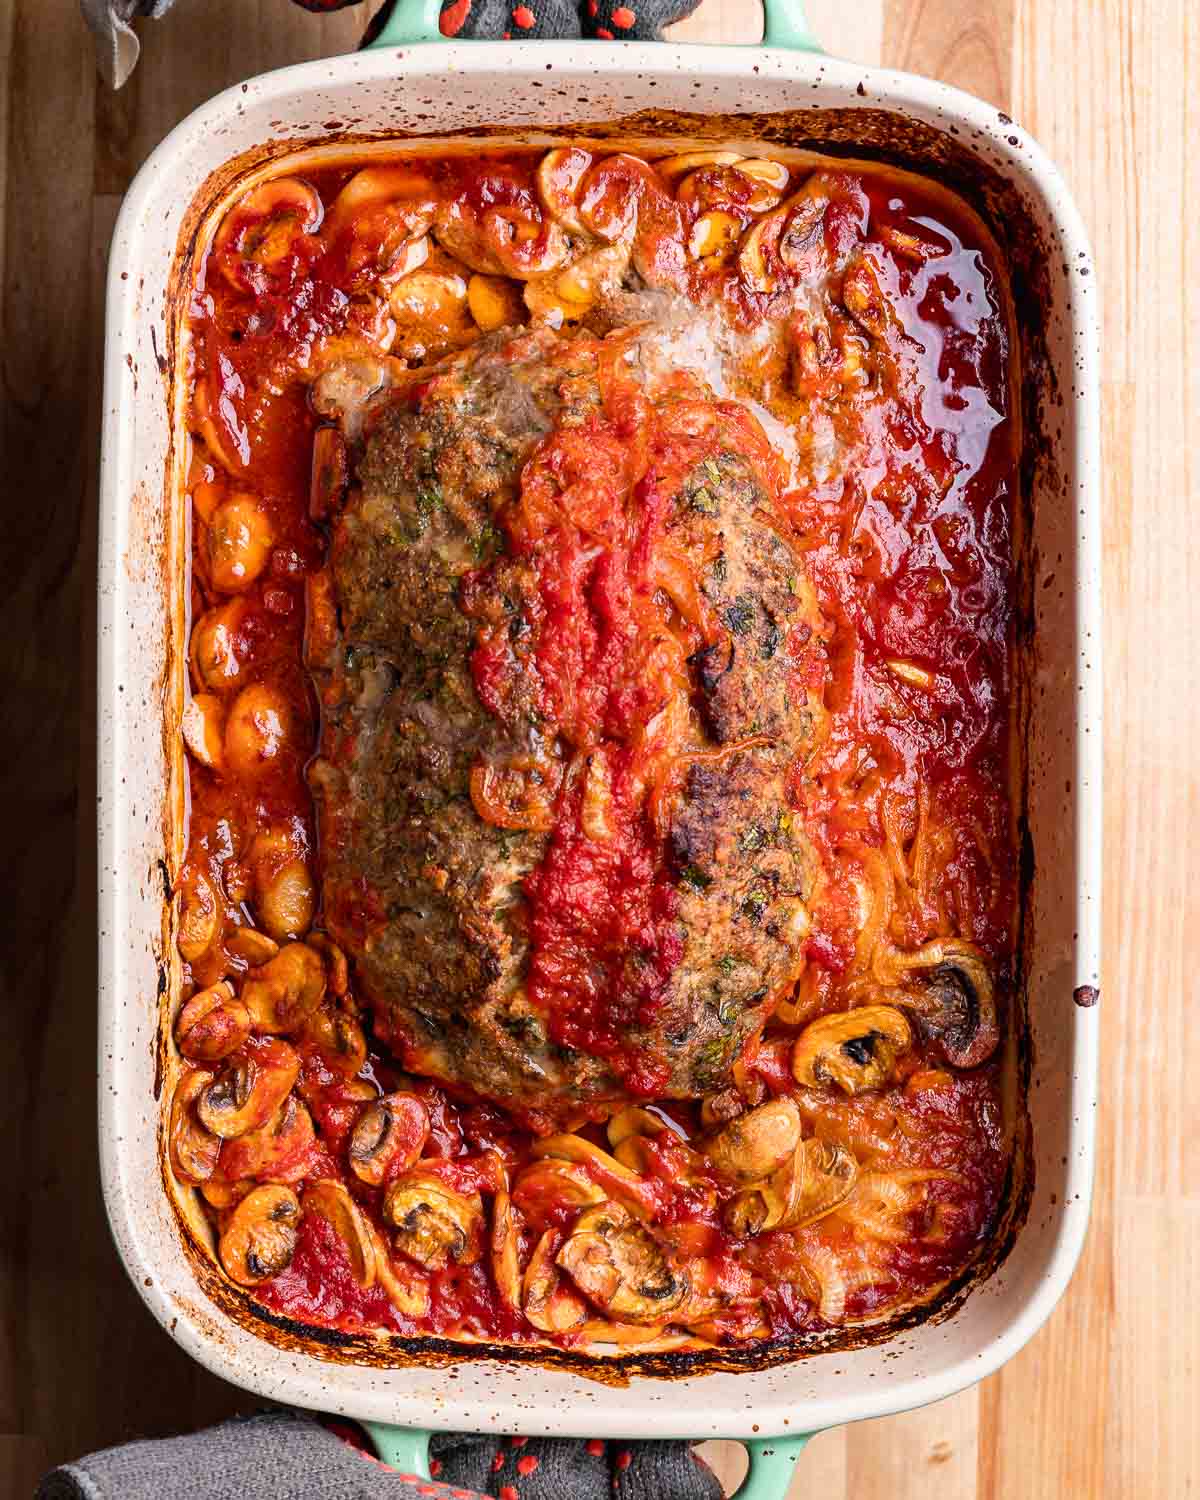 Gloved hands holding baking dish with cooked meatloaf.